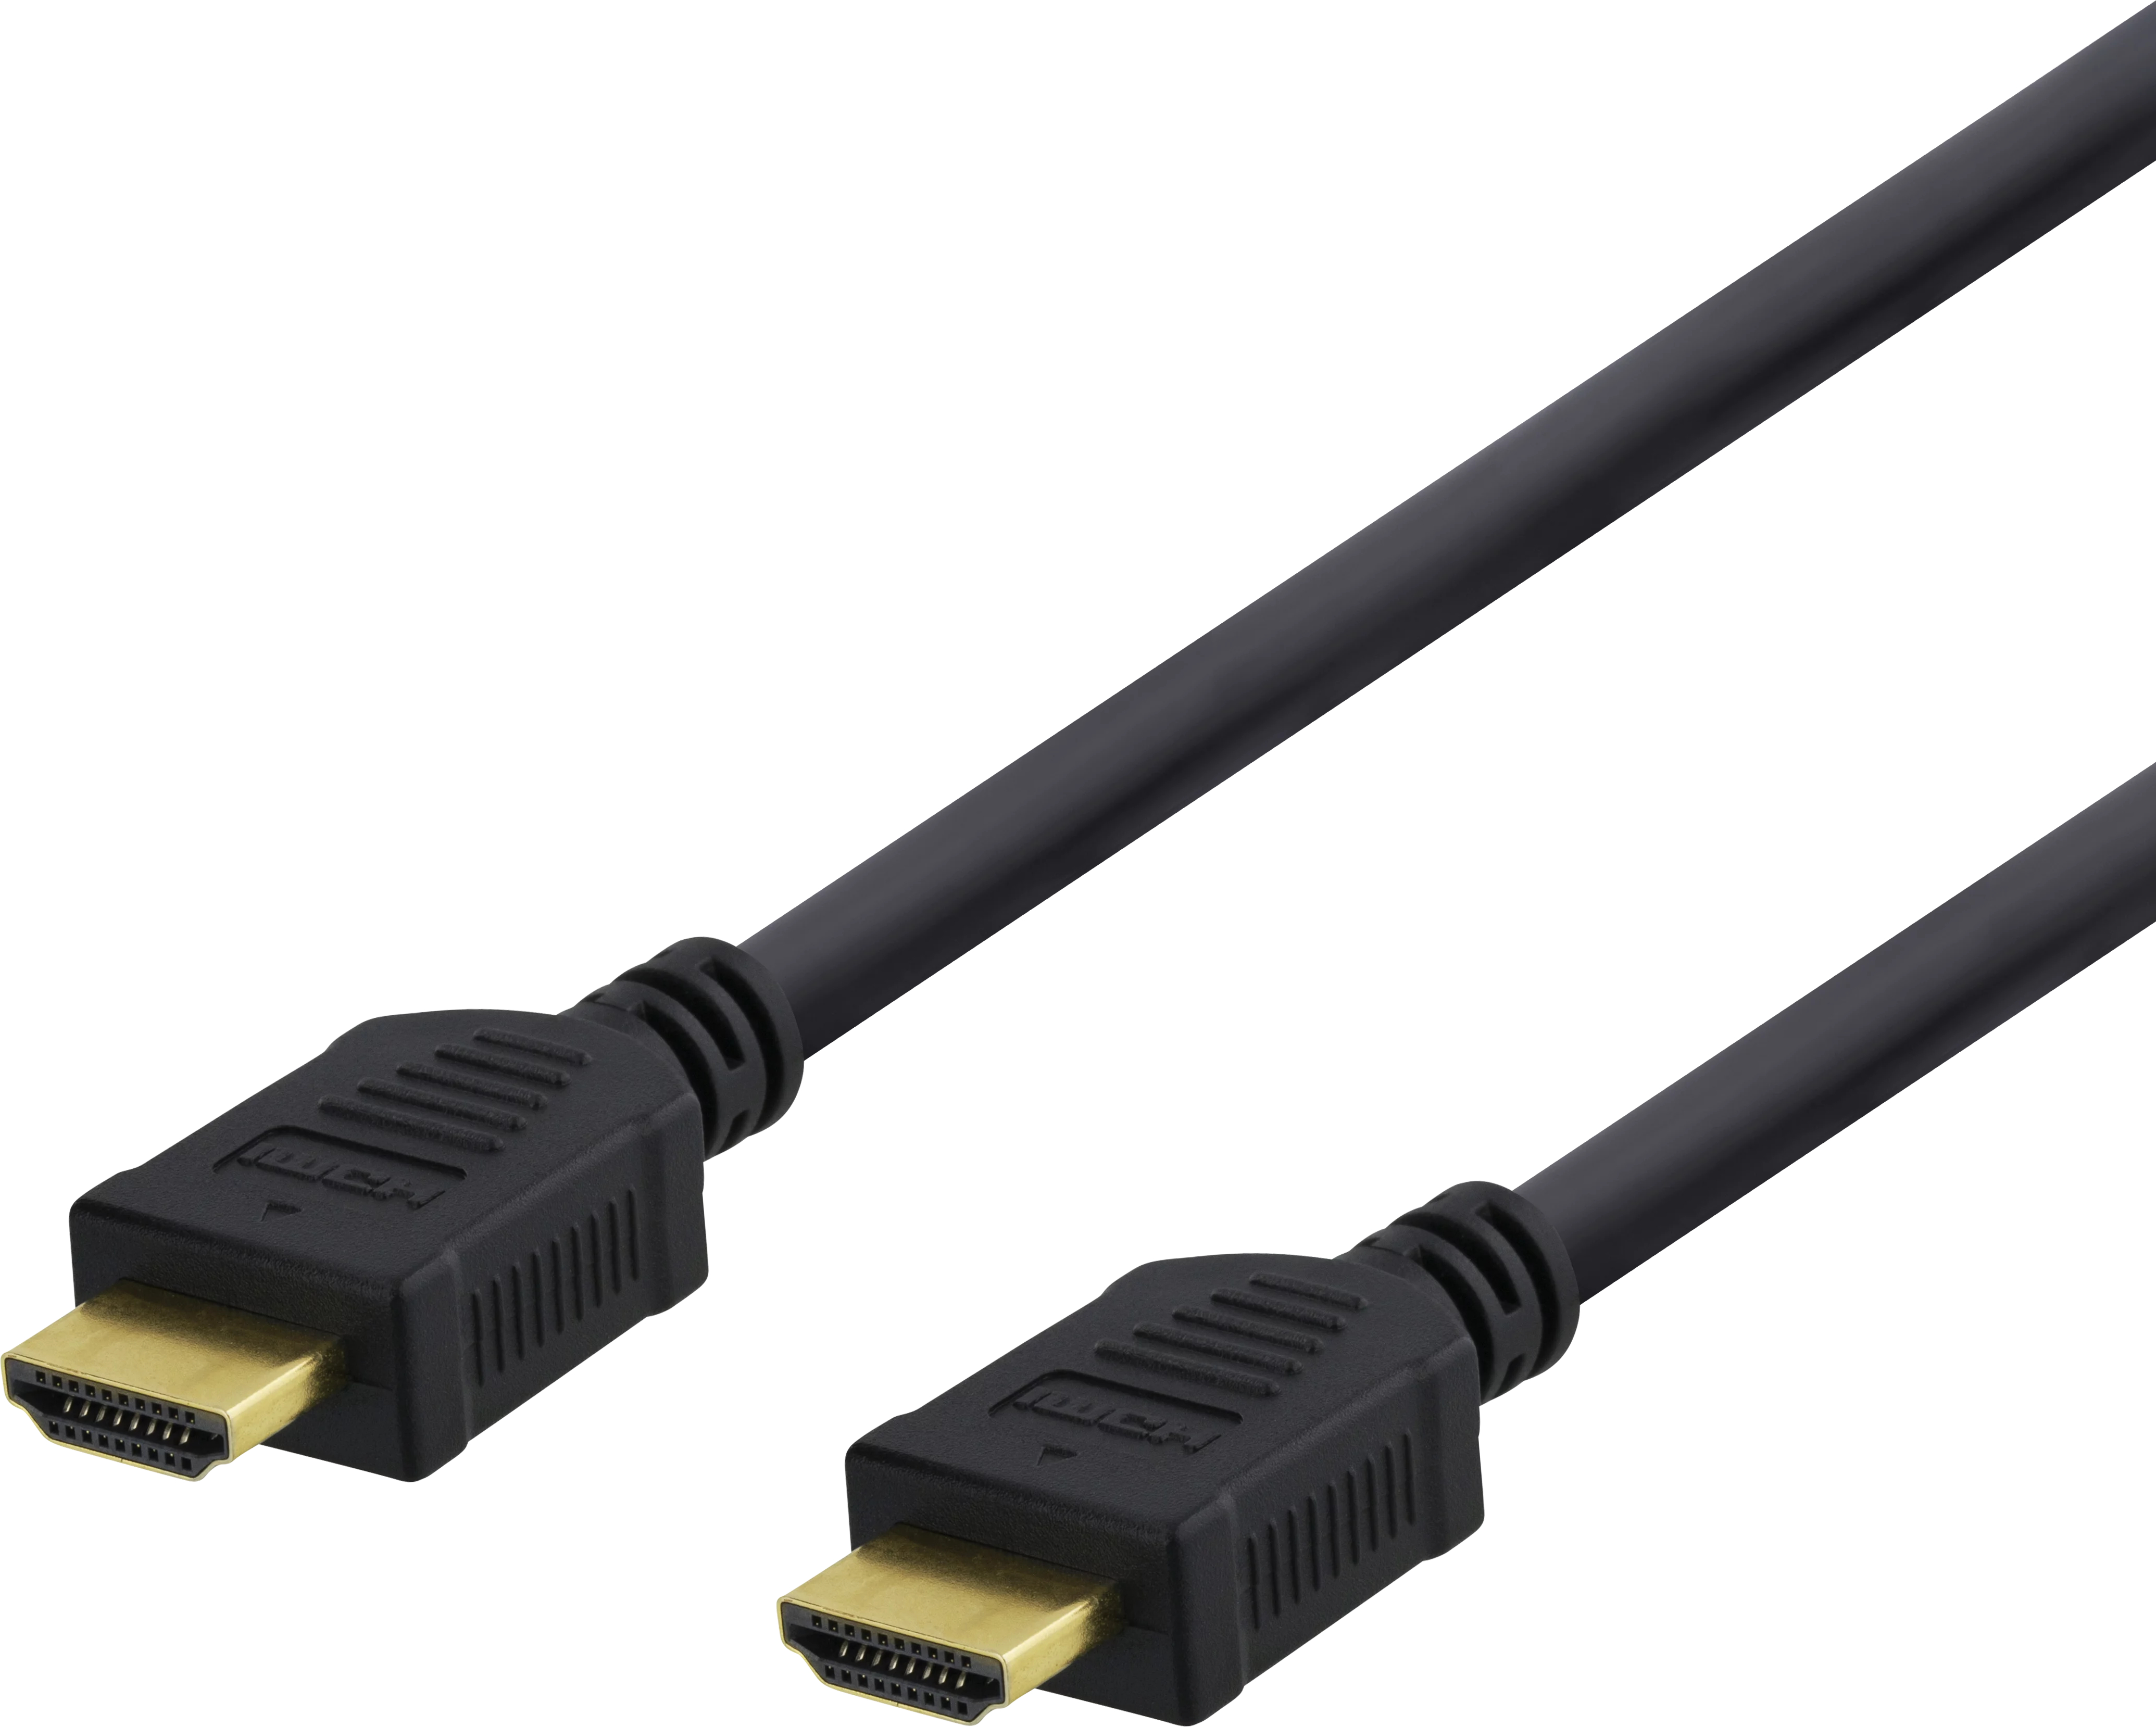 DELTACO HDMI cable Highspeed Premium HDMI-1015D w/Ethernet, 4K UHD,1.5m, Bl.